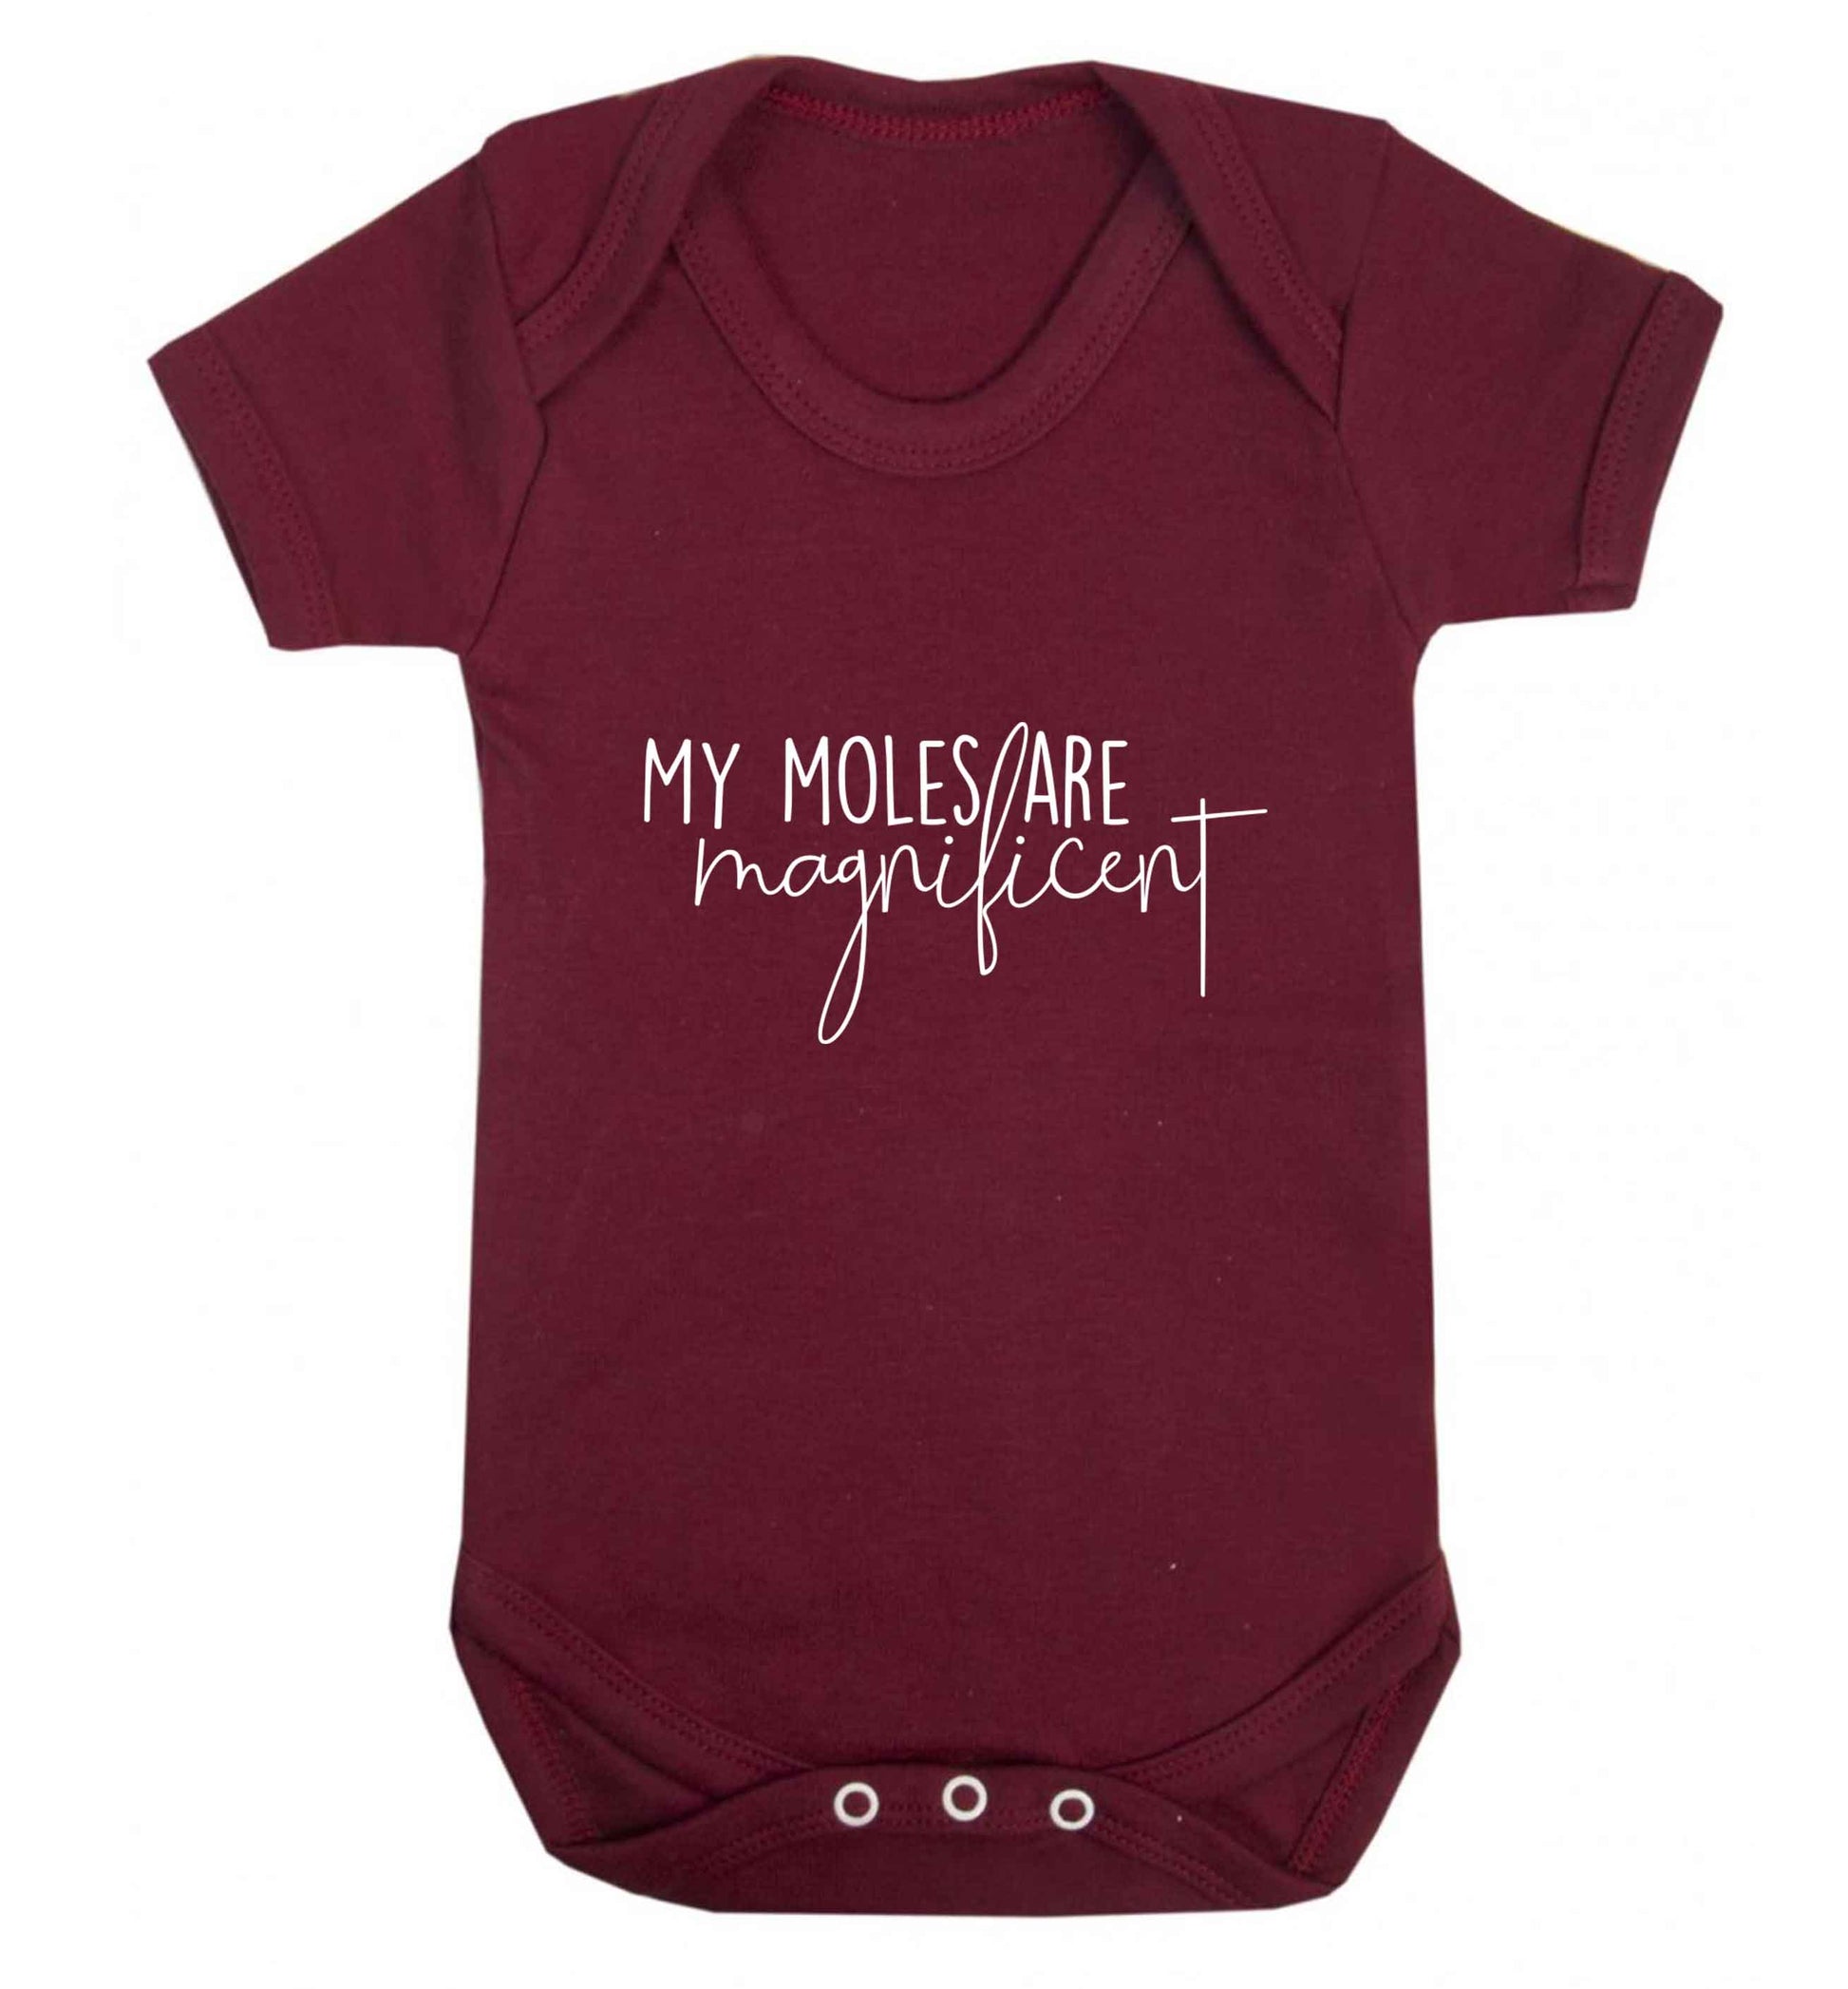 My moles are magnificent baby vest maroon 18-24 months